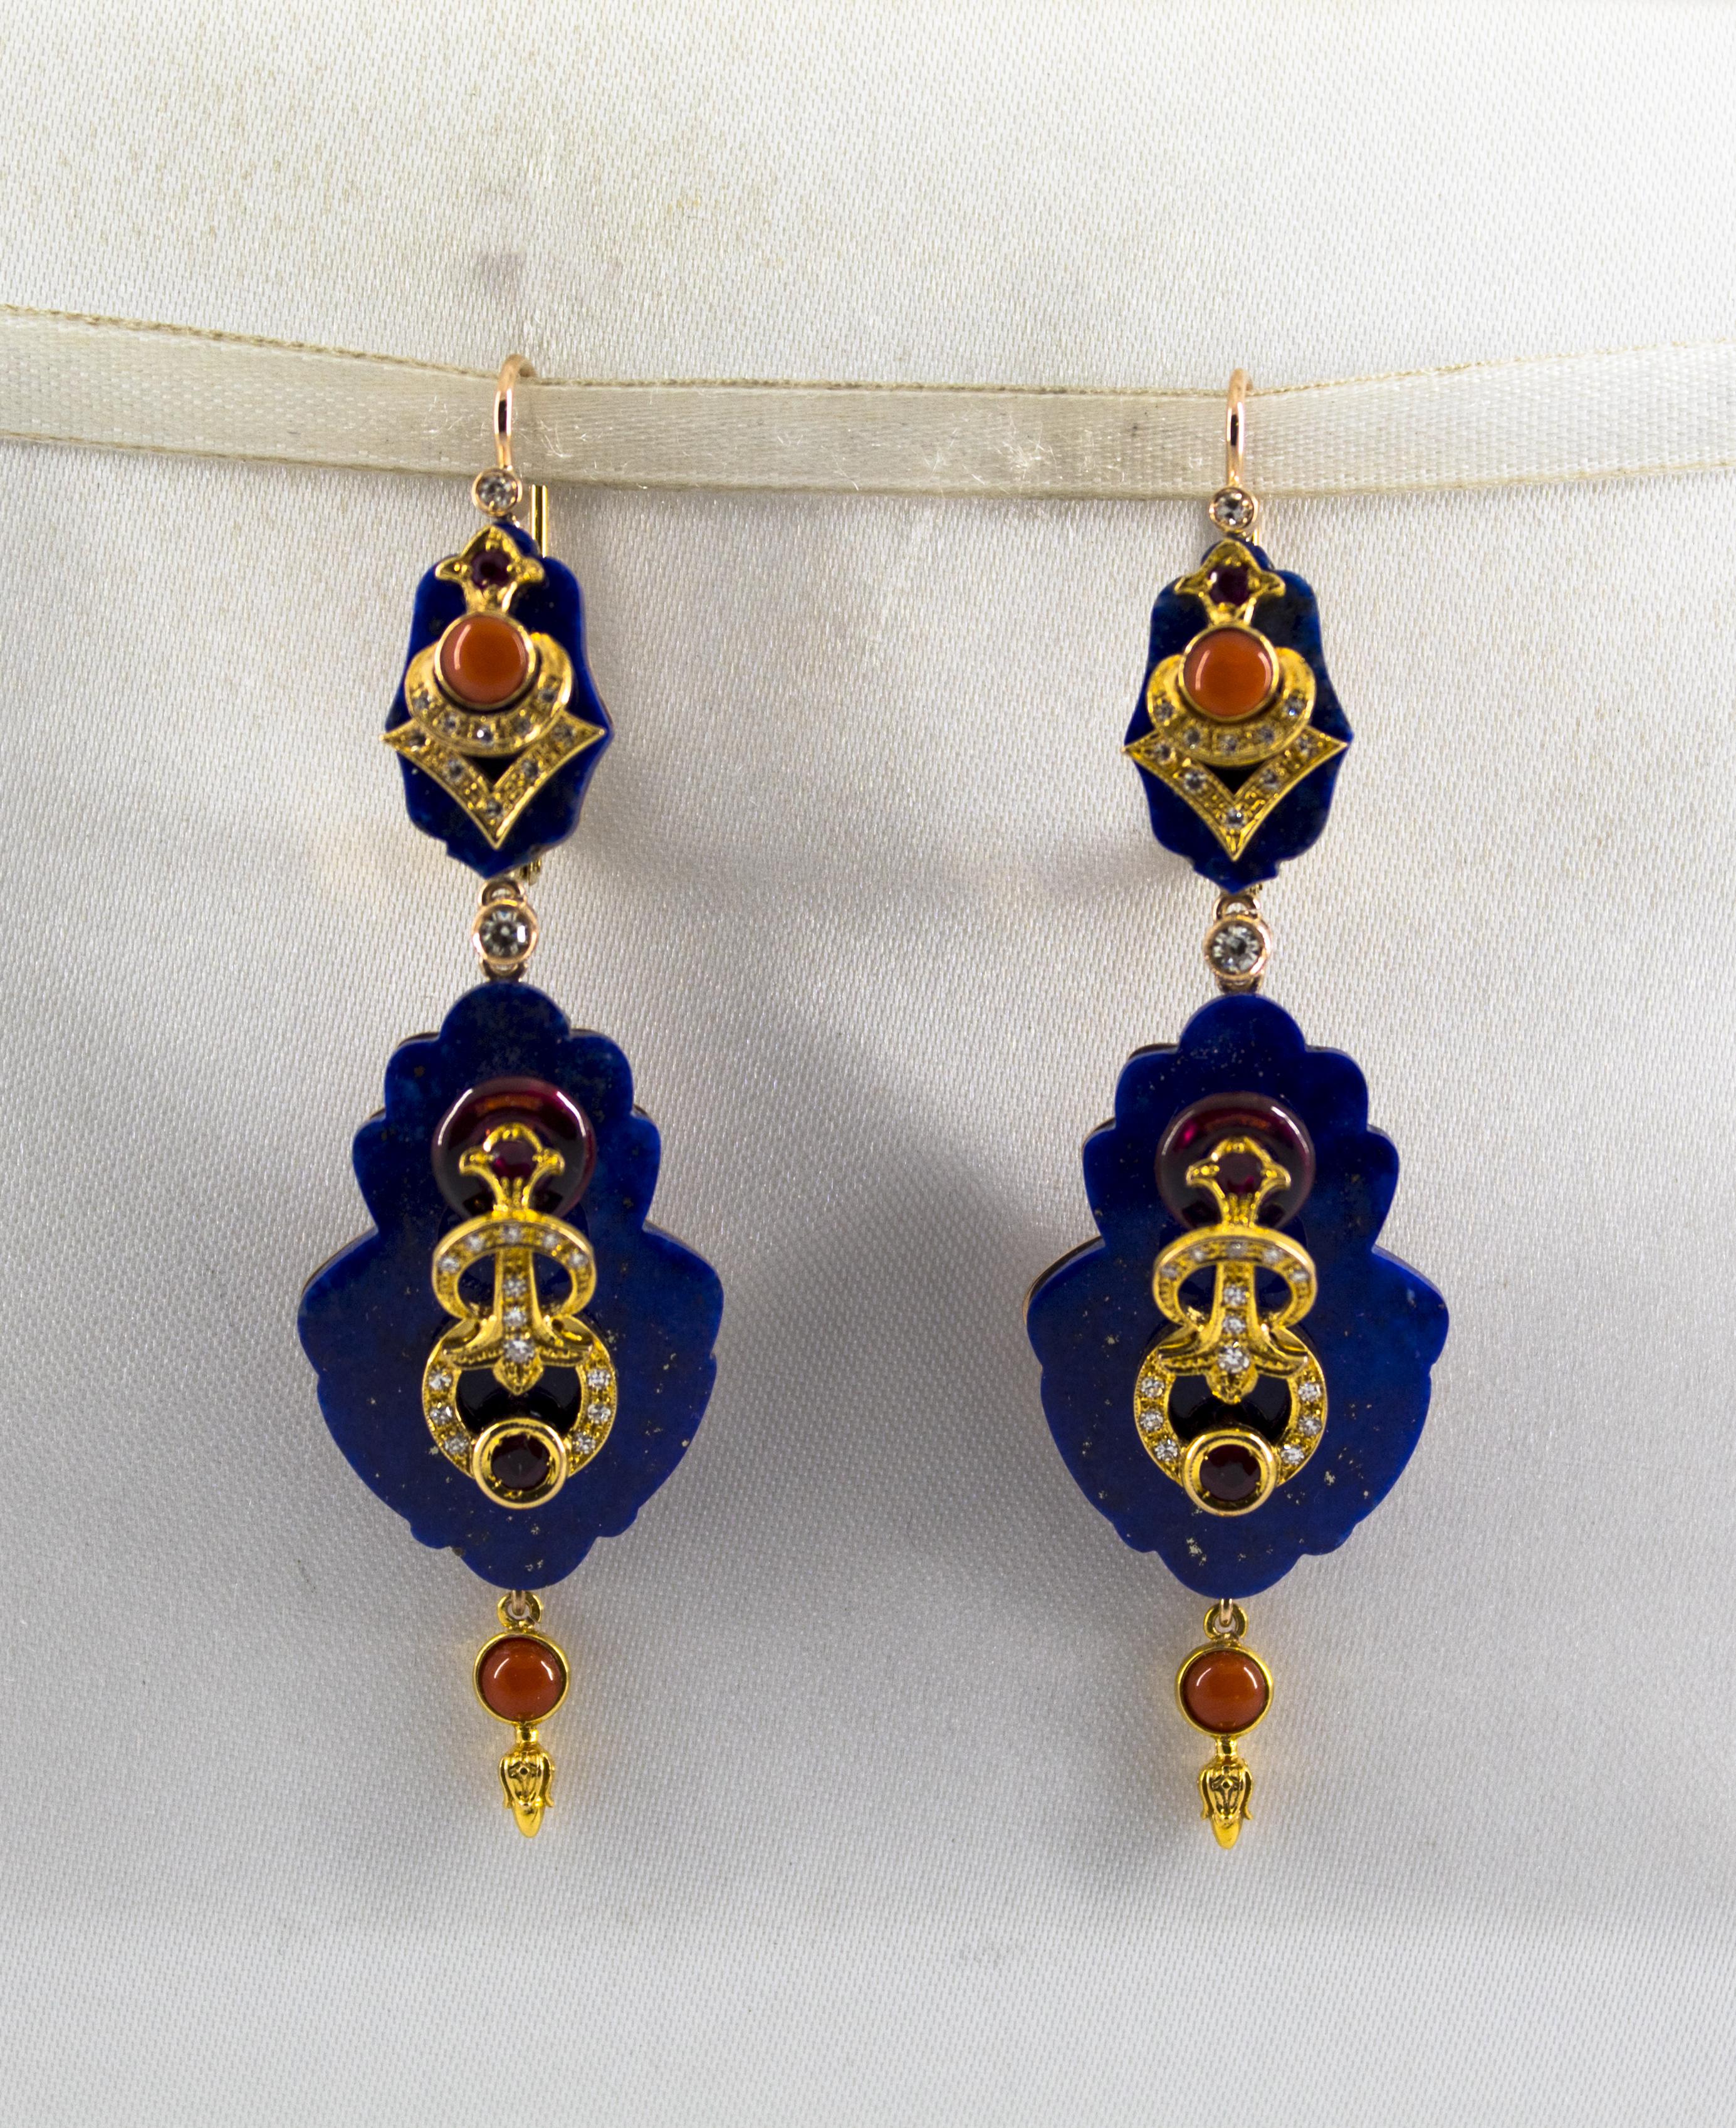 These Earrings are made of 14K Yellow Gold.
These Earrings have 0.60 Carats of White Diamonds.
These Earrings have 0.50 Carats of Rubies.
These Earrings have also Lapis Lazuli, Coral and Amethyst.
All our Earrings have pins for pierced ears but we